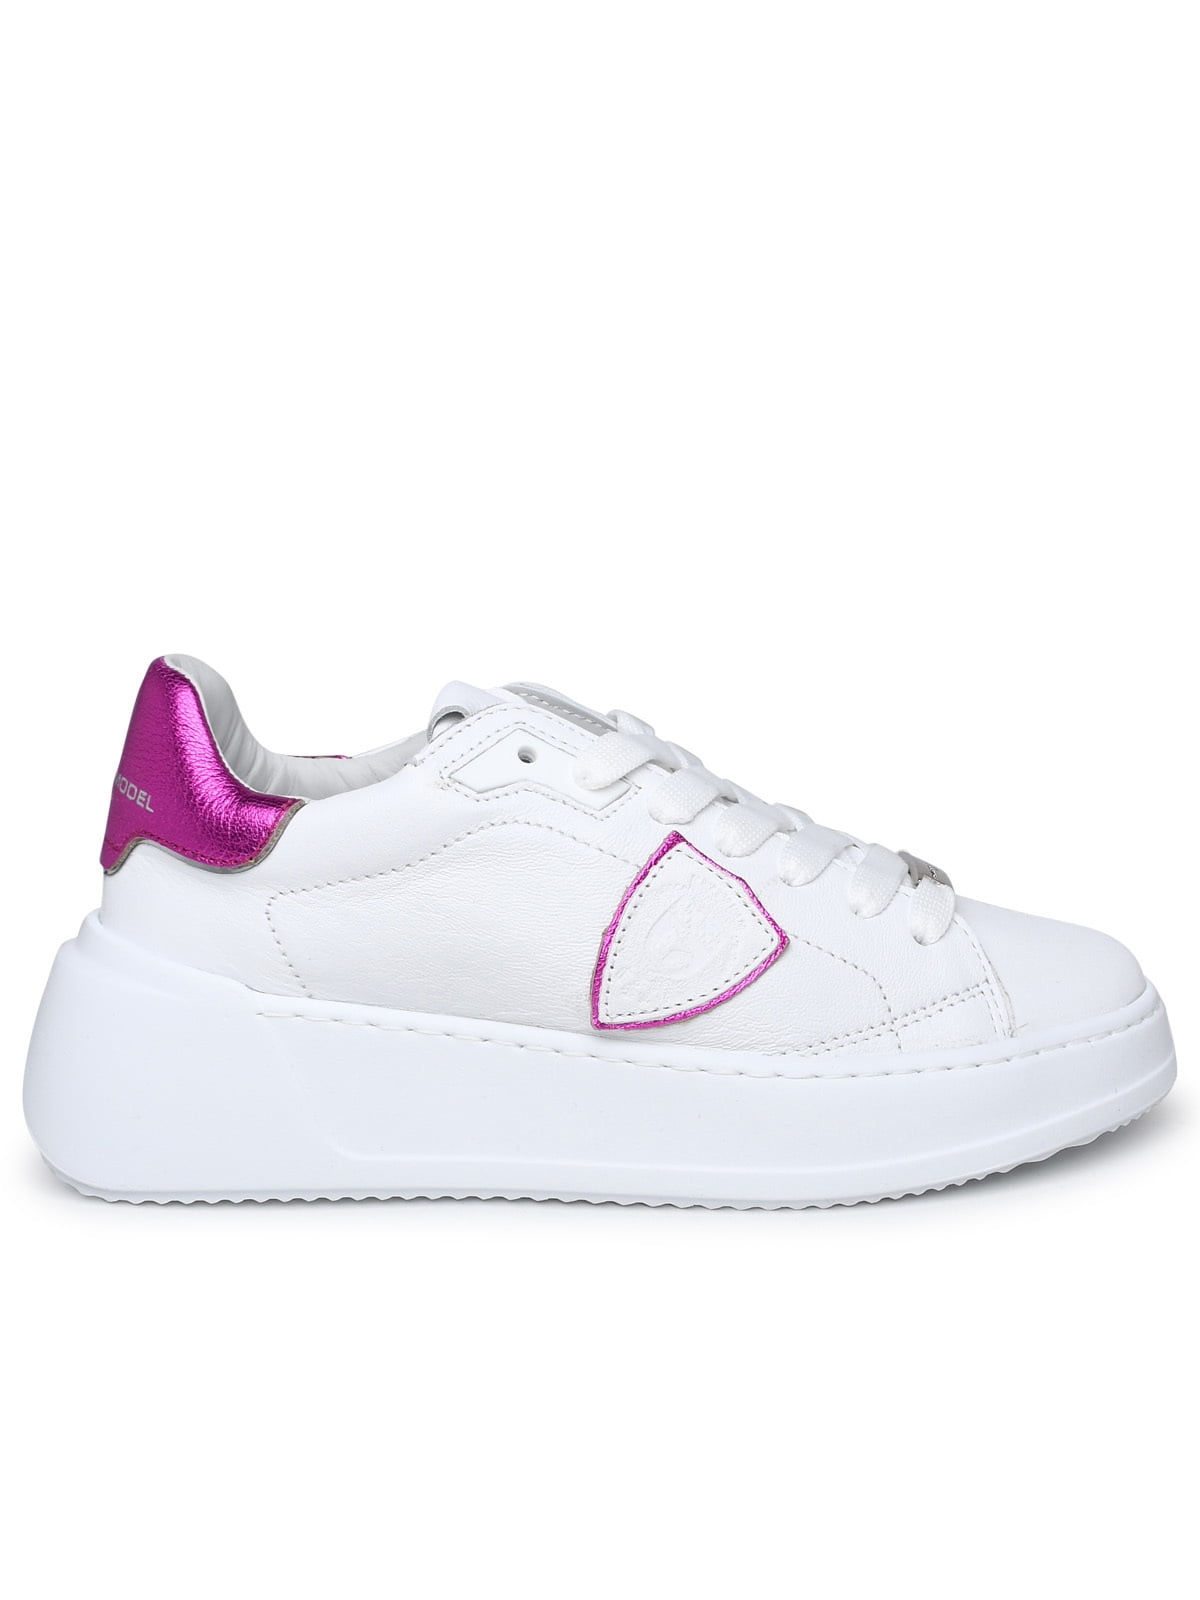 Philippe Model Donna Tres Temple White Leather Sneakers - Walmart.com